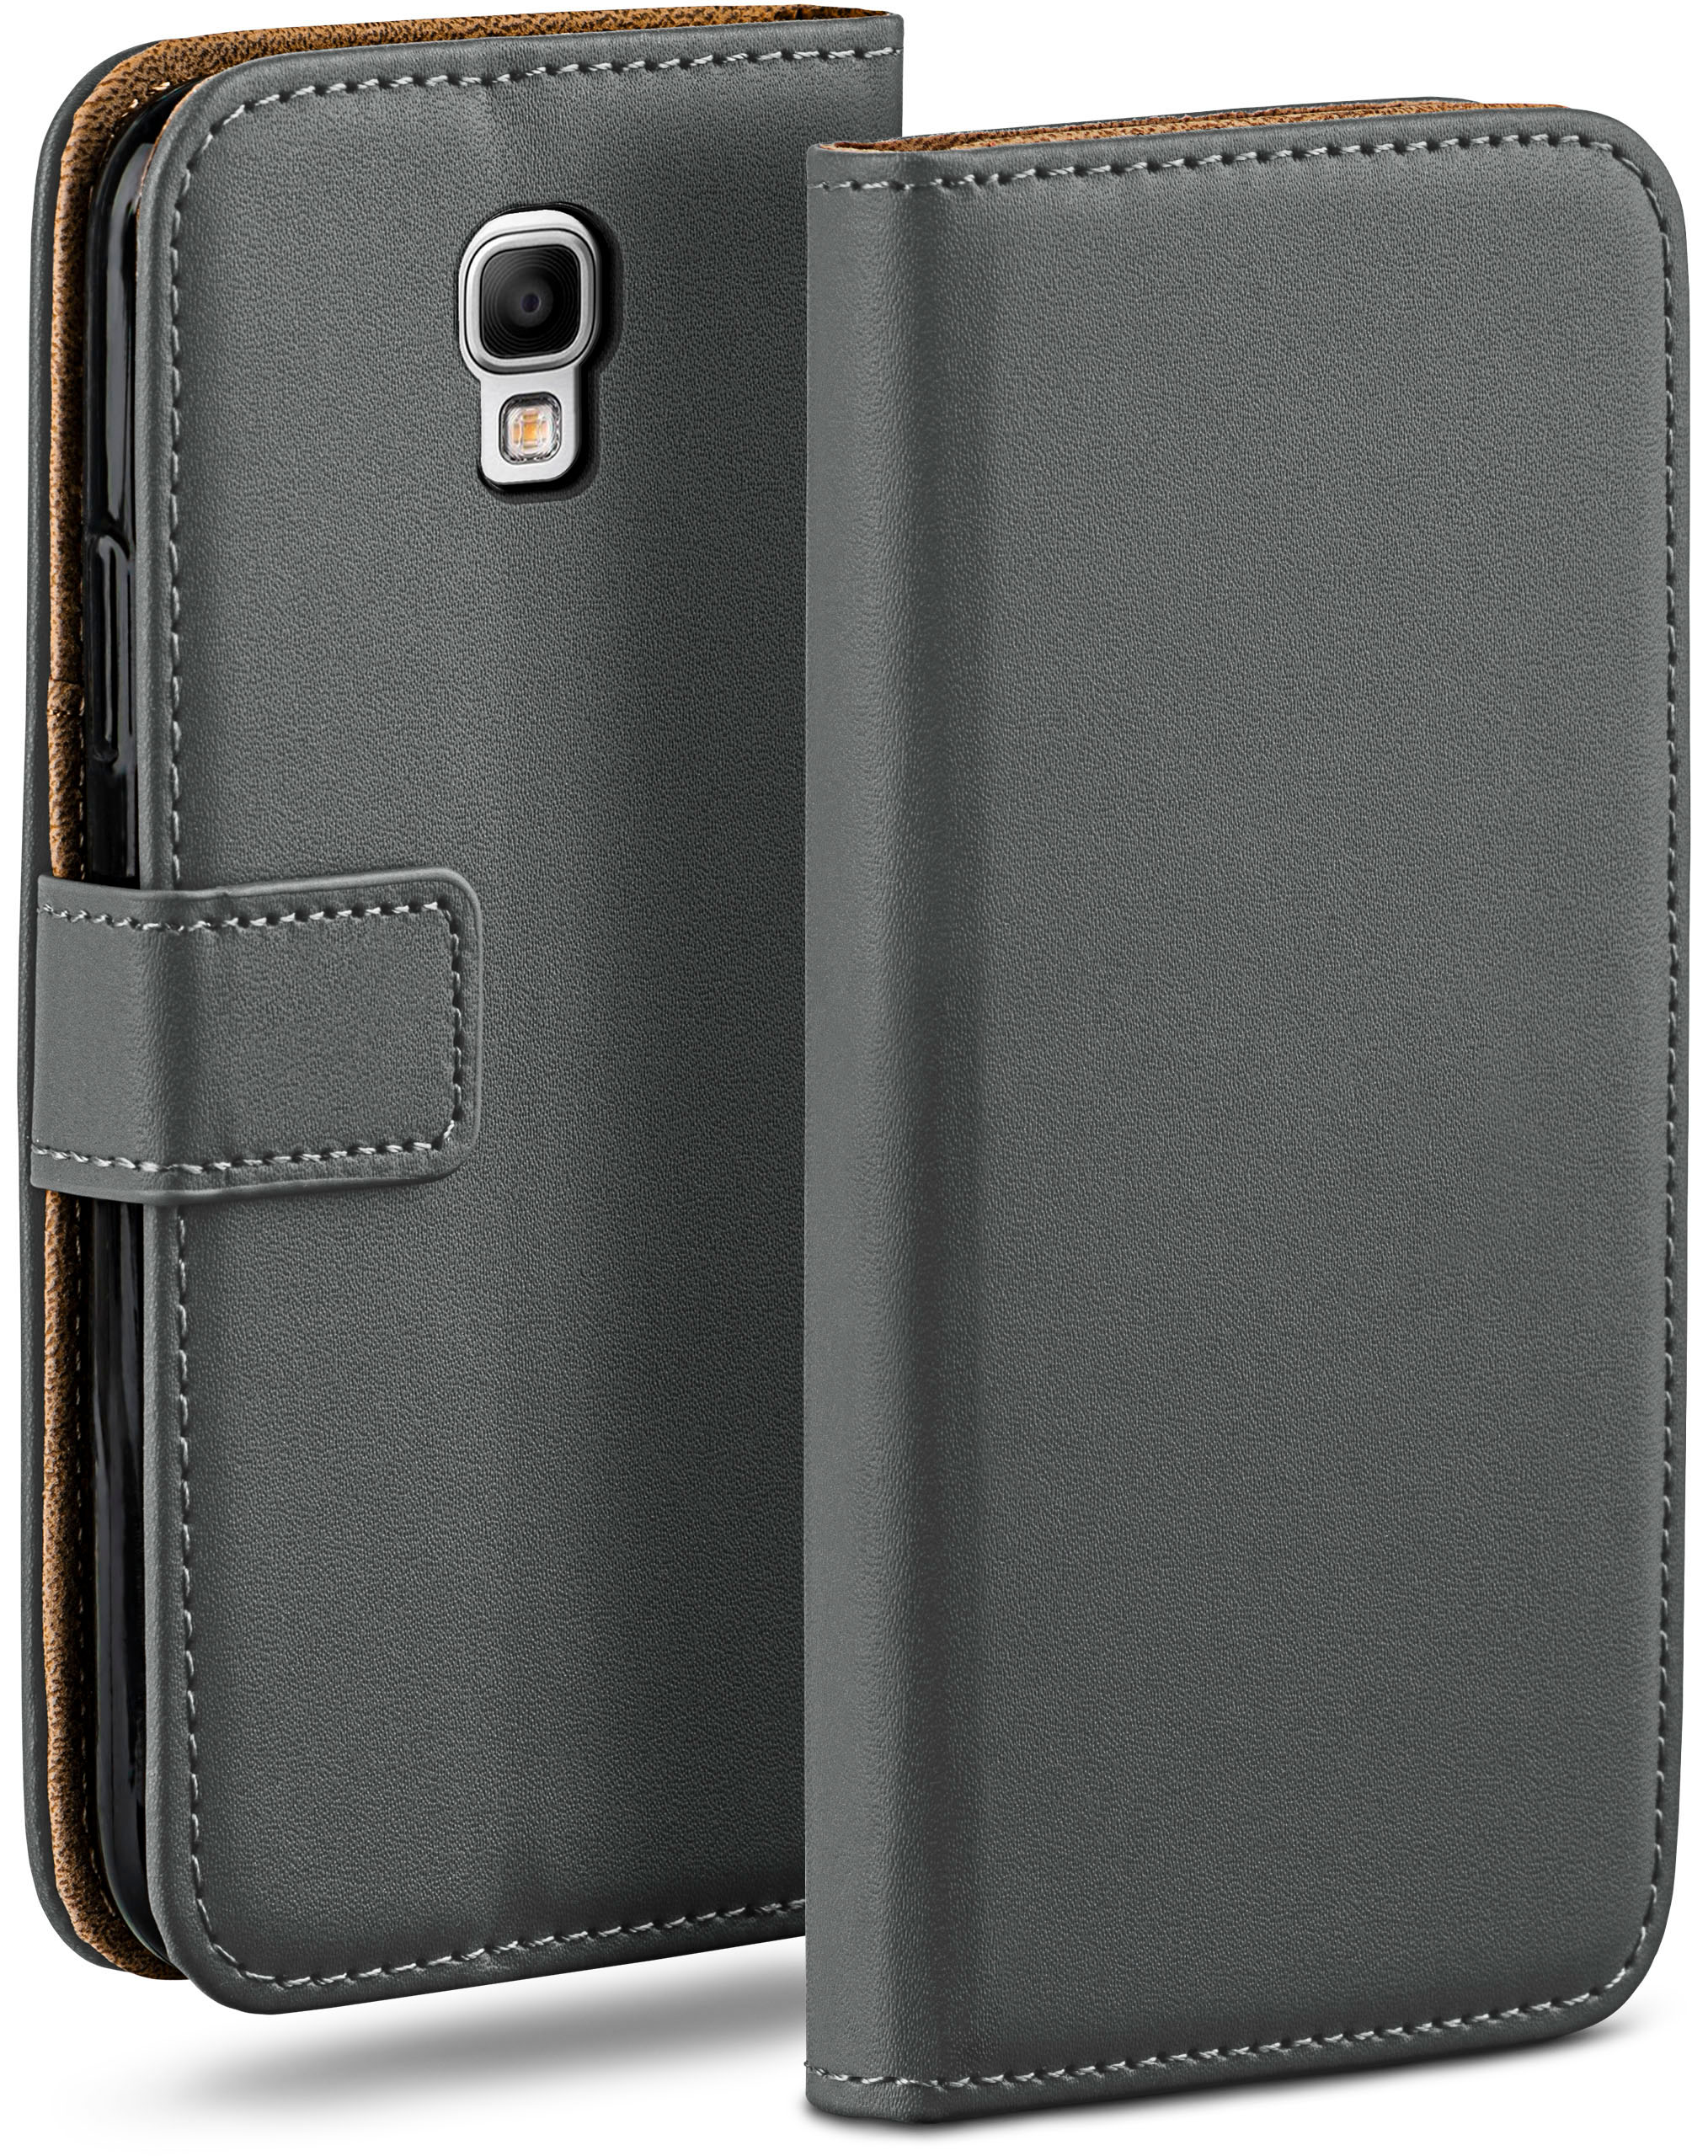 MOEX Book Case, Bookcover, 3 Note Galaxy Neo, Anthracite-Gray Samsung